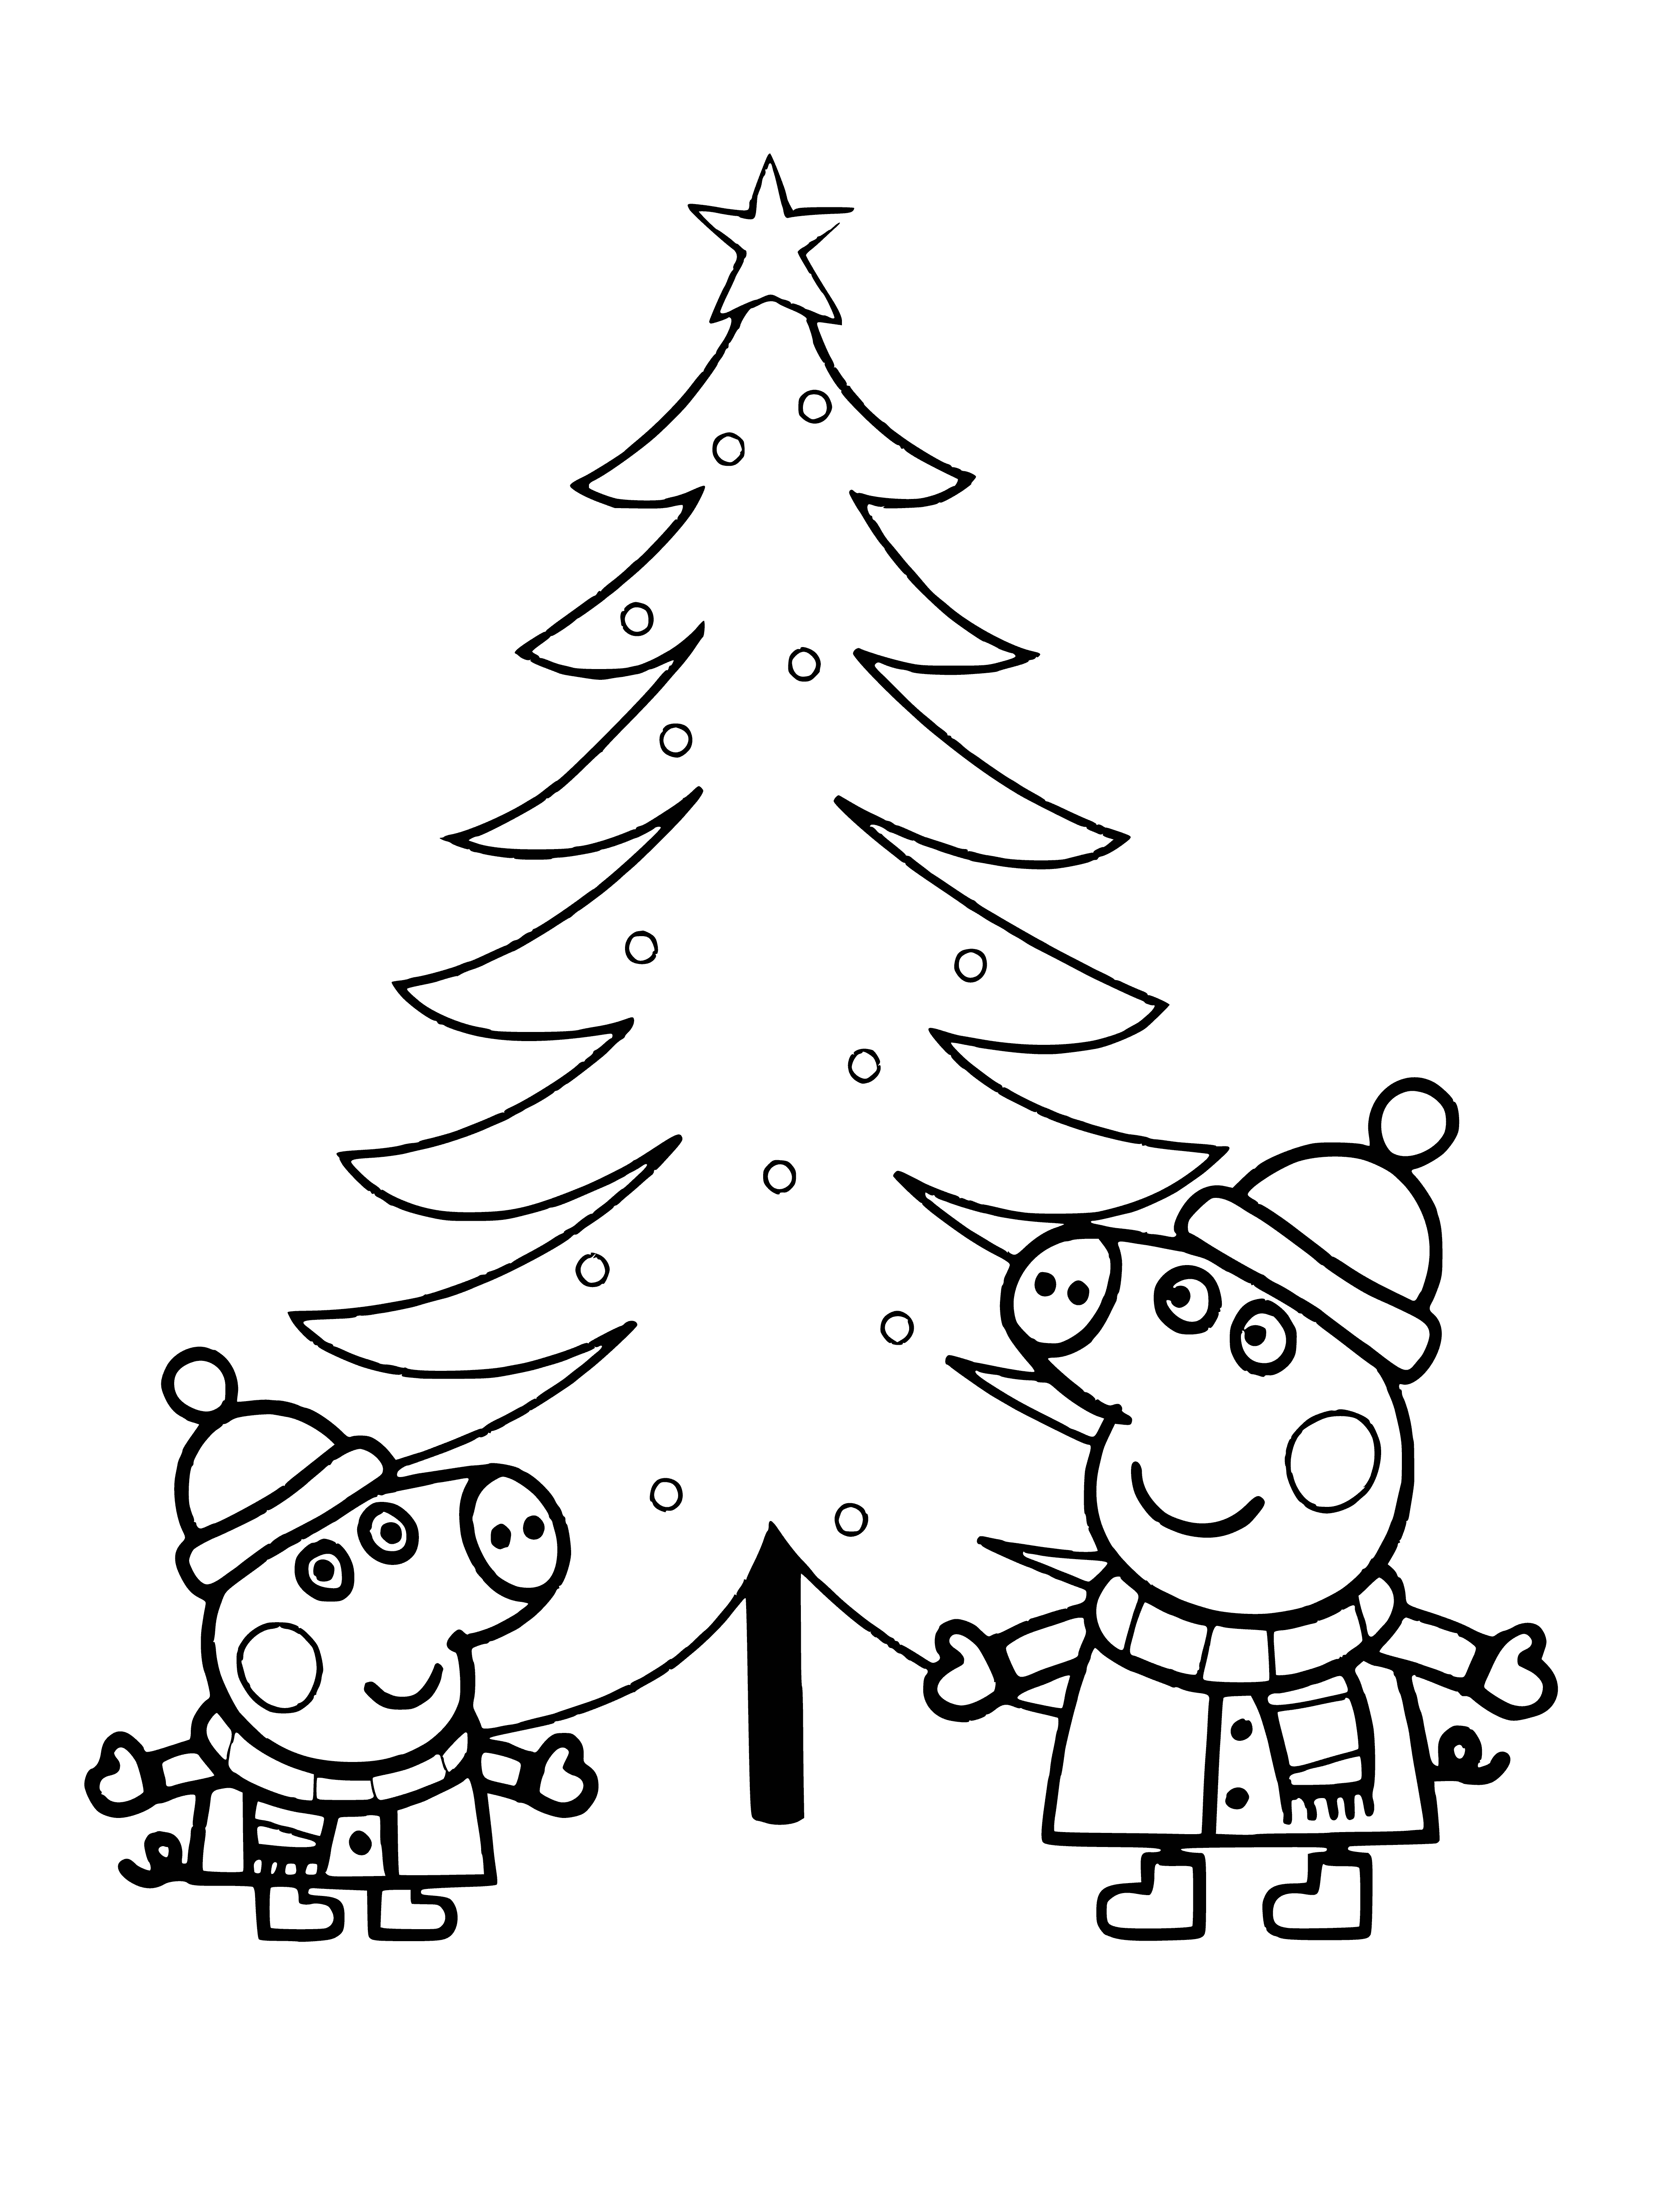 coloring page: Two piglets in Xmas hats stand in front of a tree, each holding a different colored balloon. Both have brown hair. #Christmas